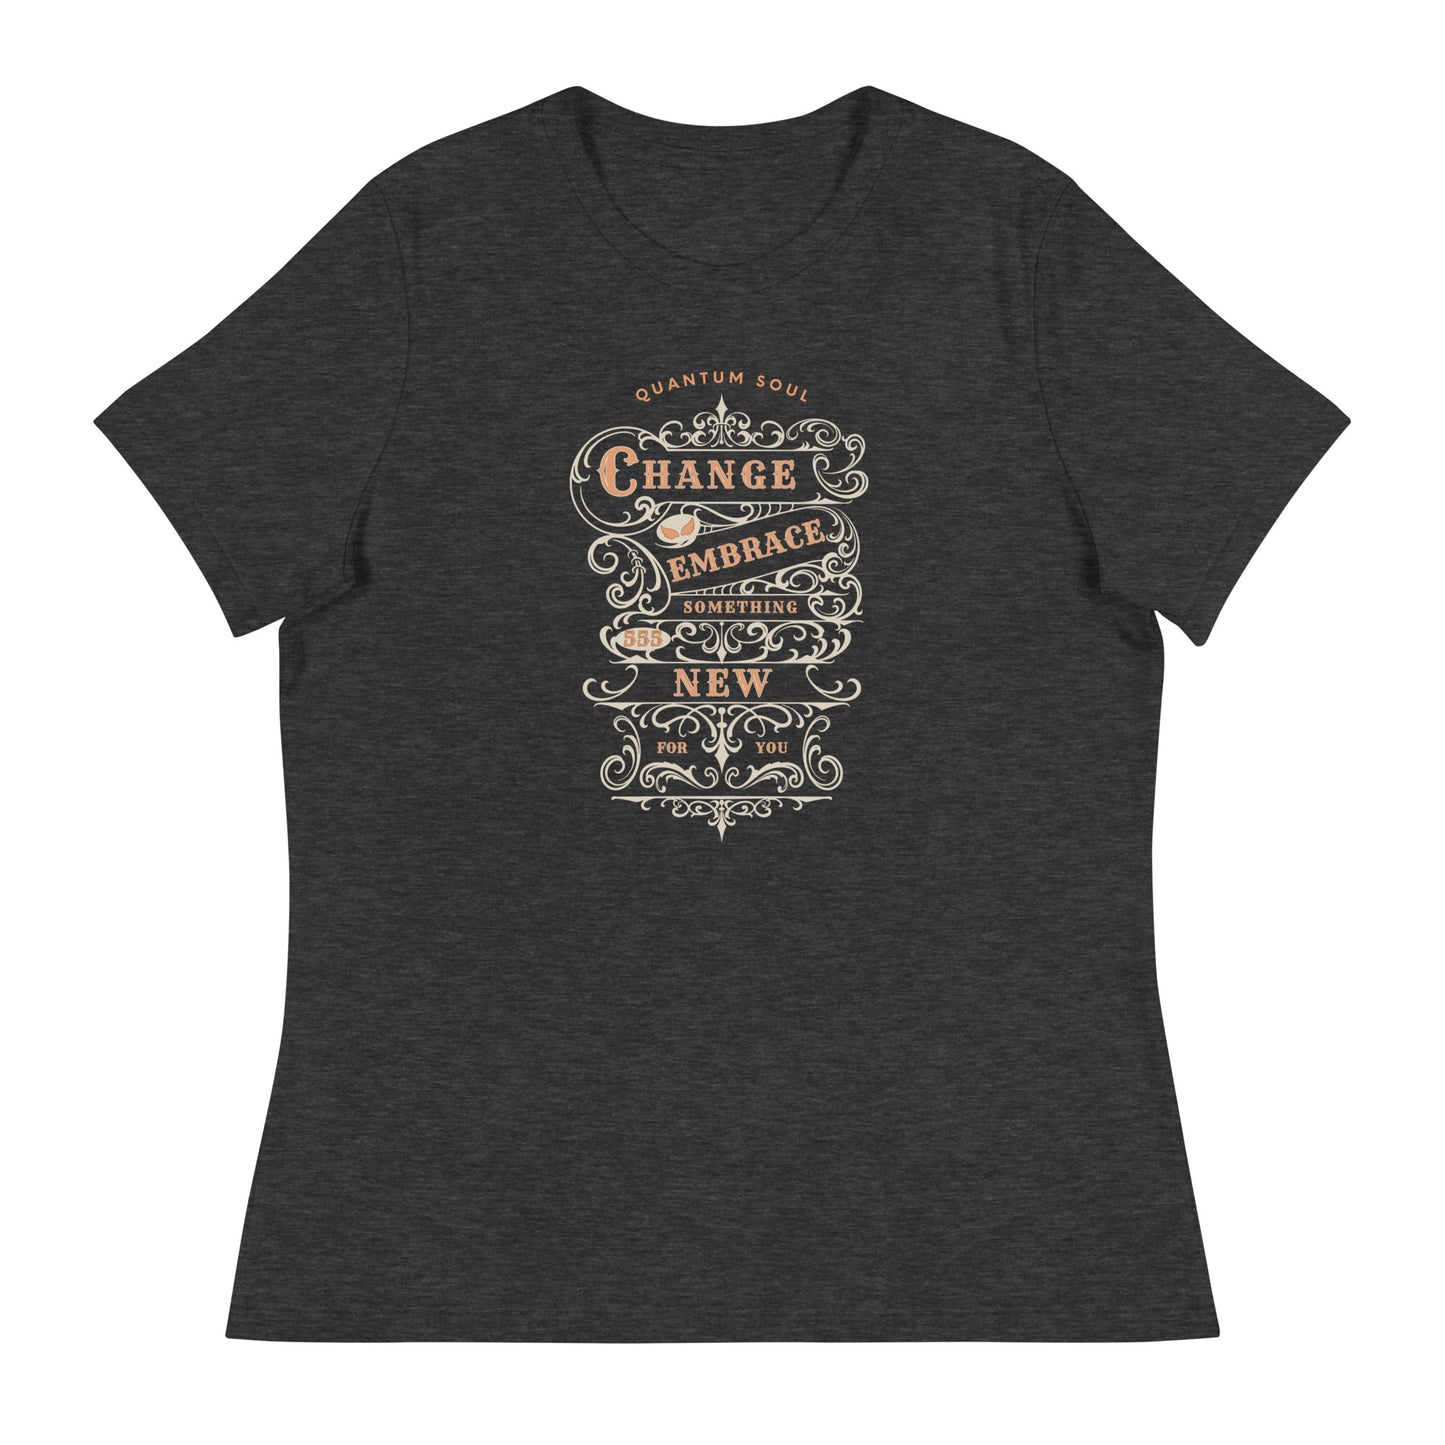 Change 555 womens-relaxed-t-shirt-dark-grey-heather-front flat